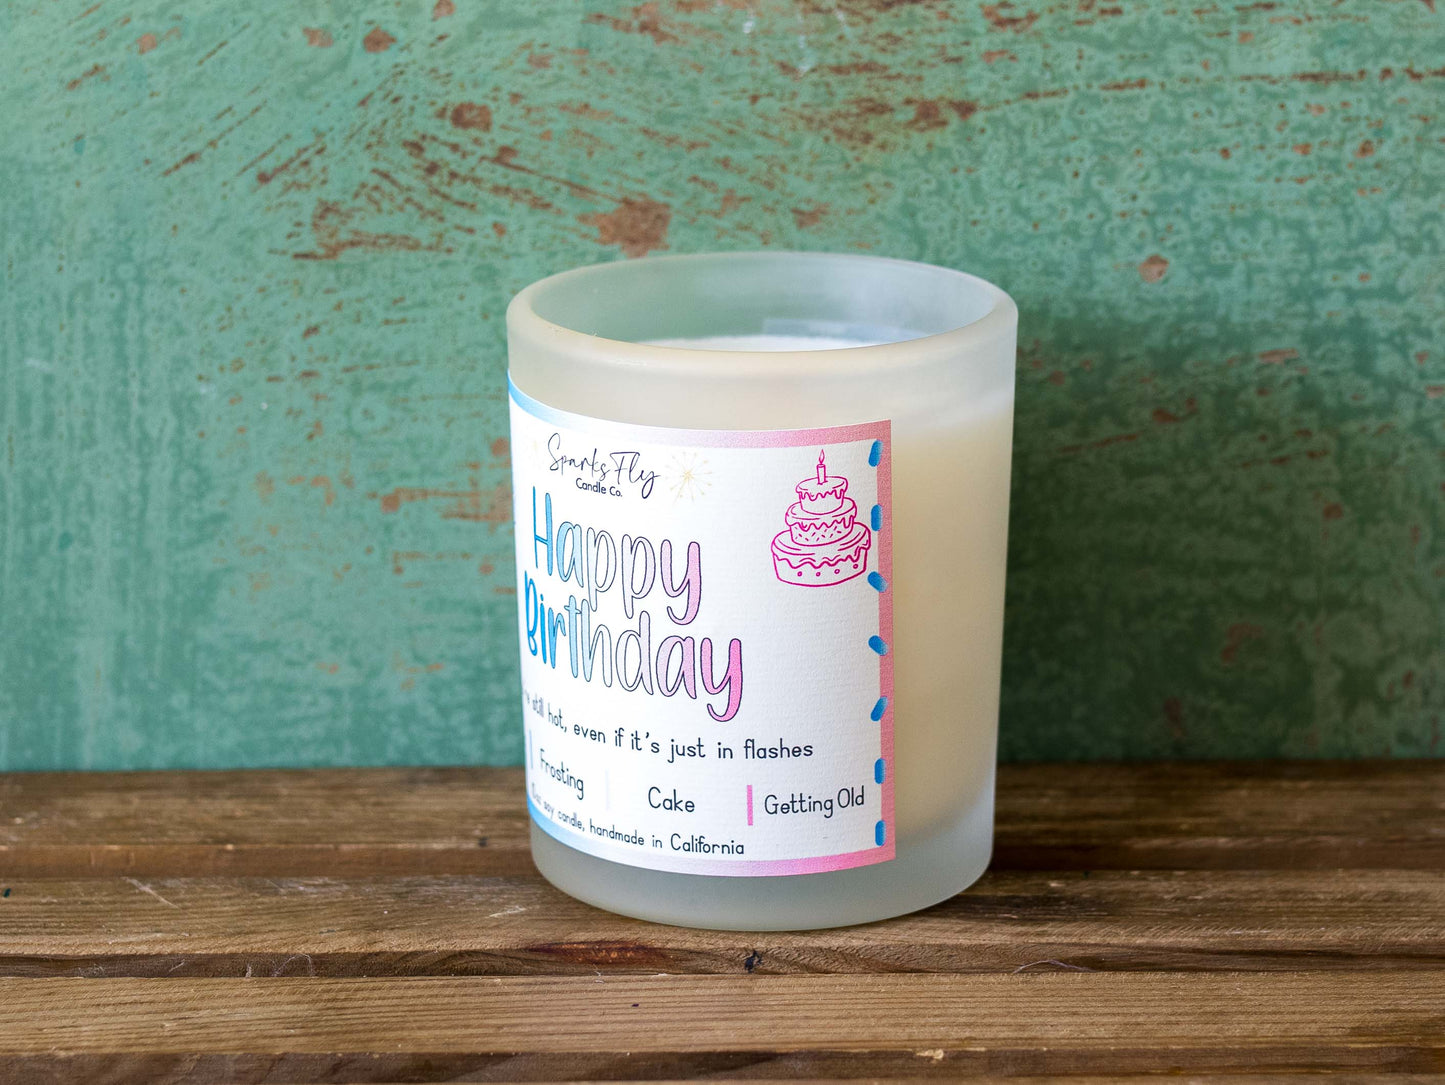 Happy Birthday Candle - Celebrating the sizzling moments, one hot flash at a time.